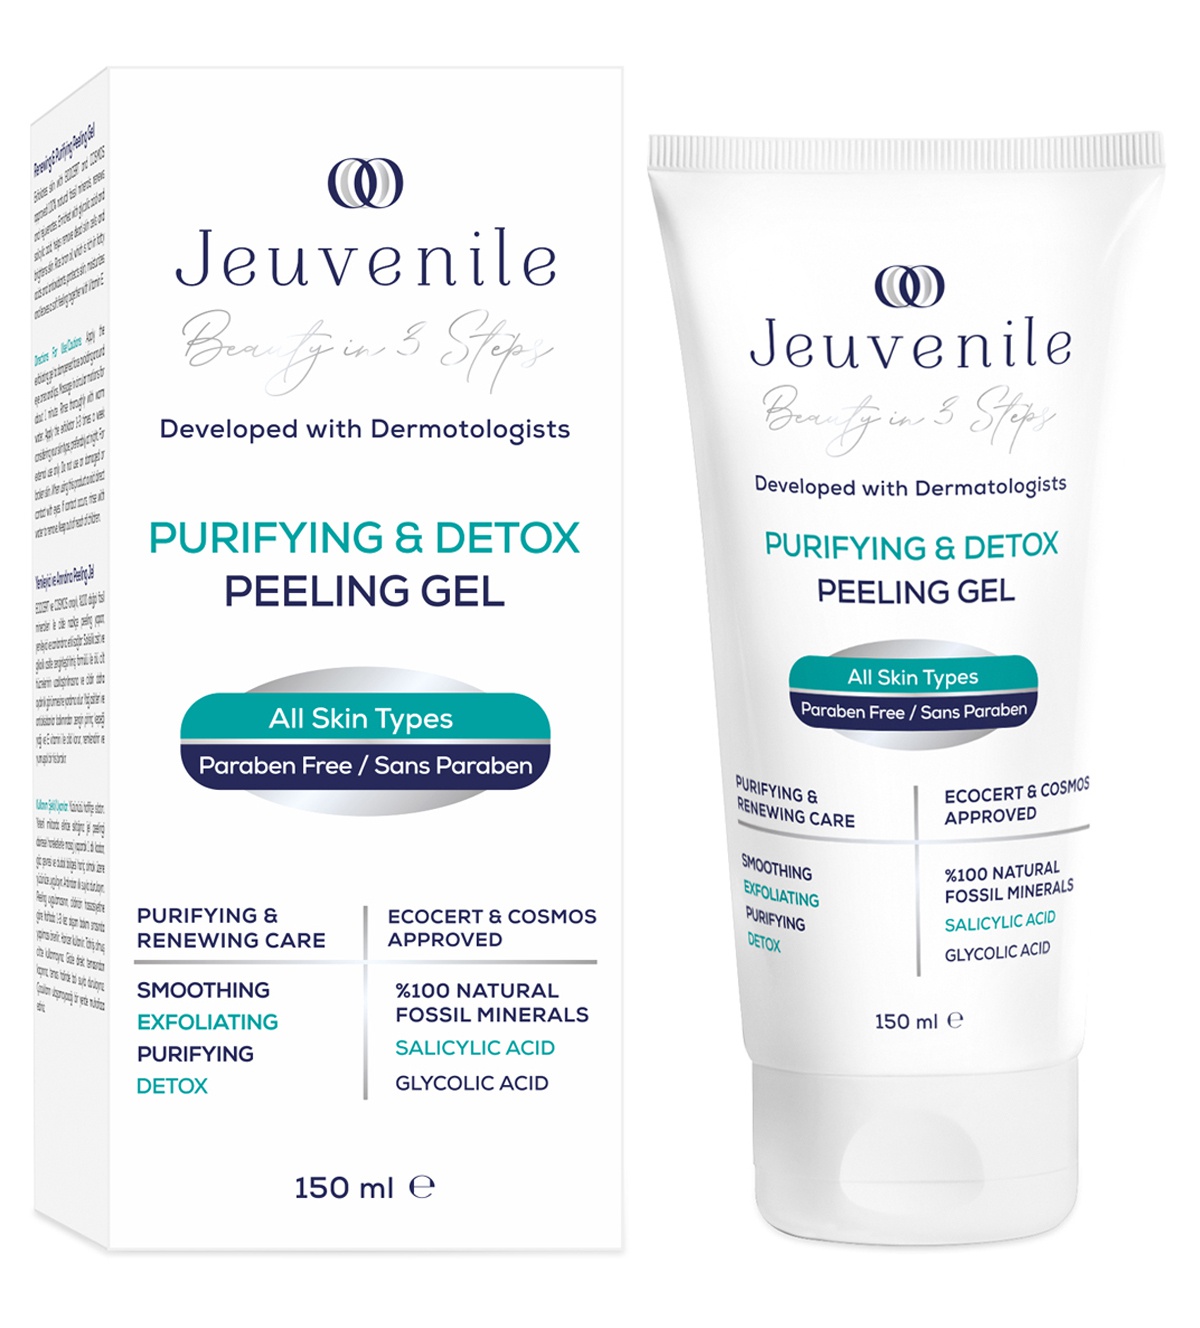 Jeuvenile Renewing & Purifying %100 Natural Fossil Mineral Peeling Gel